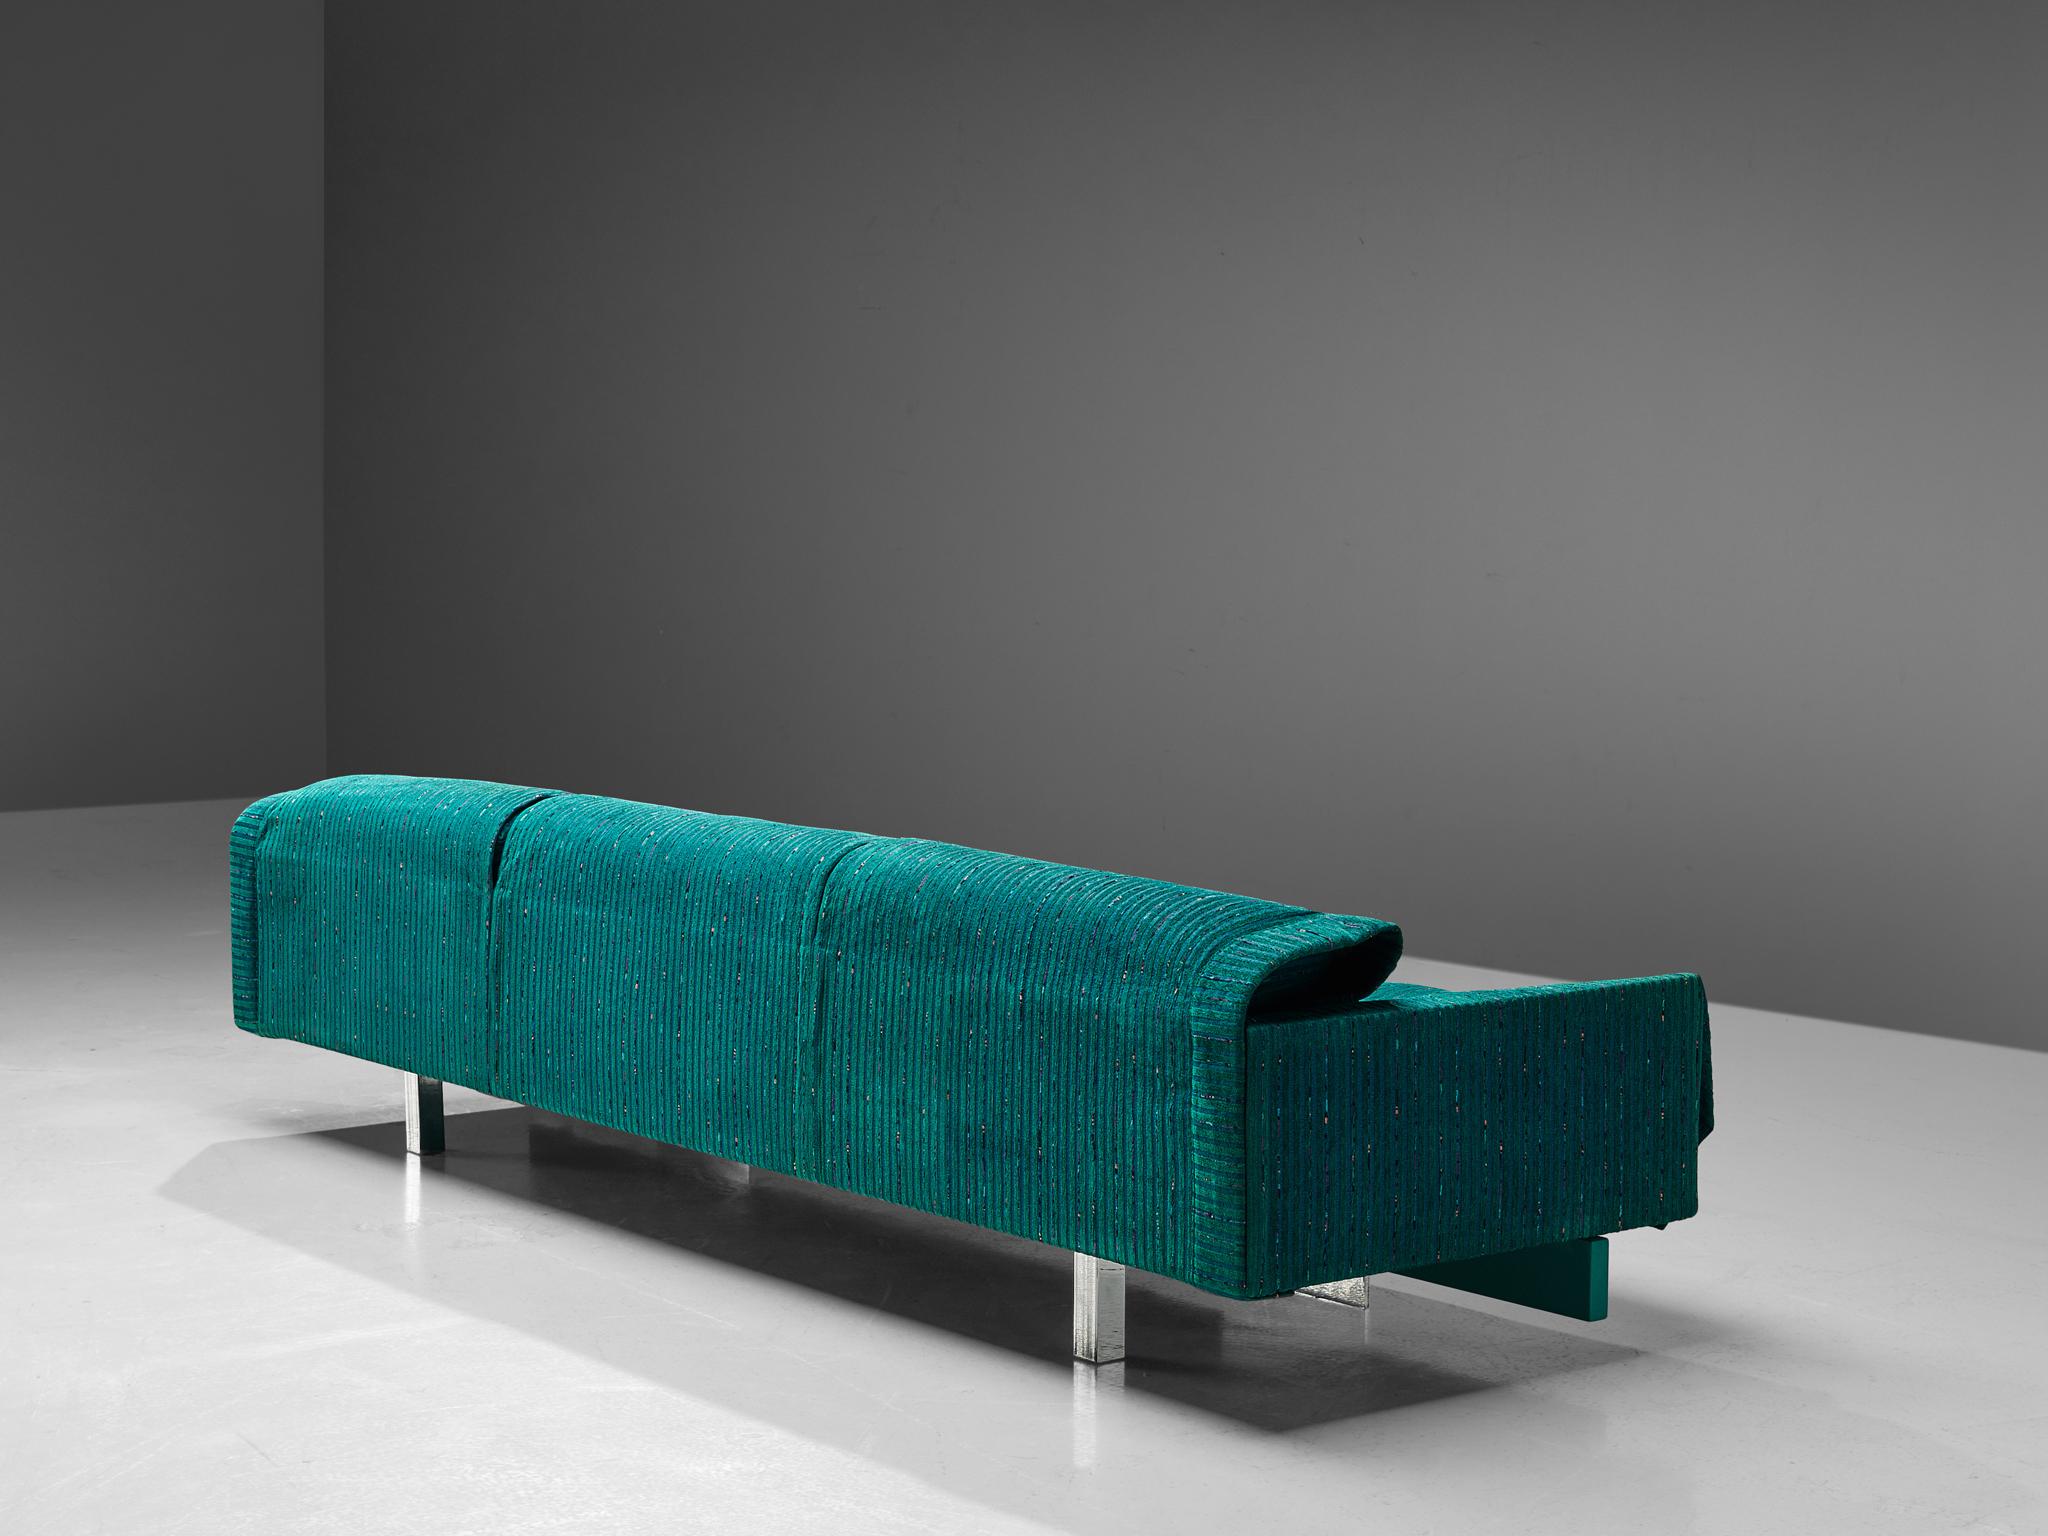 Metal Saporiti Large Sofa in Structured Turquoise Upholstery